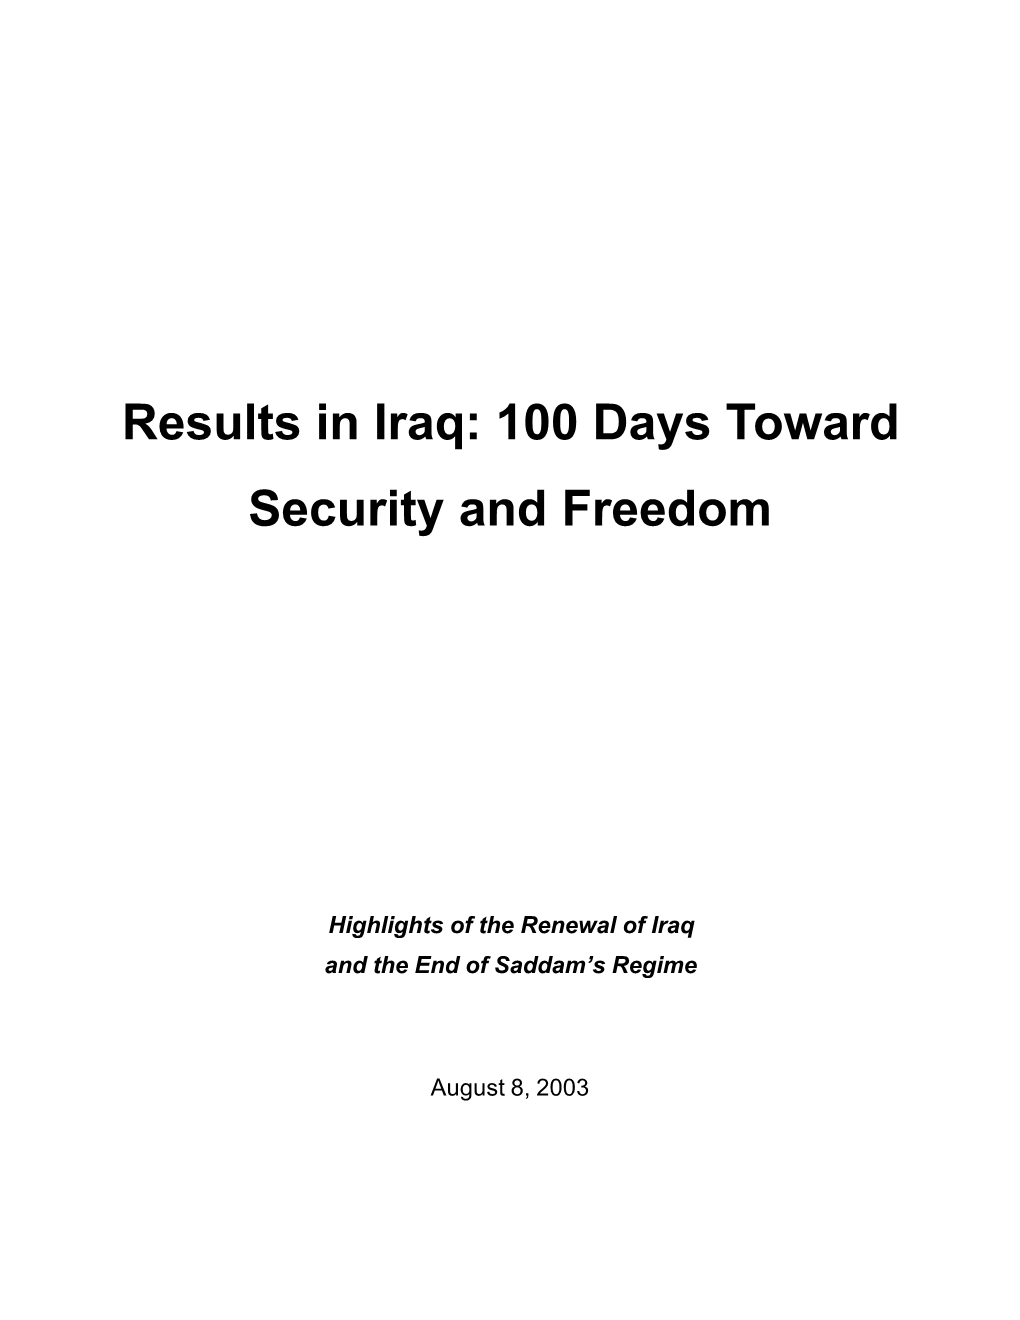 Results in Iraq: 100 Days Toward Security and Freedom